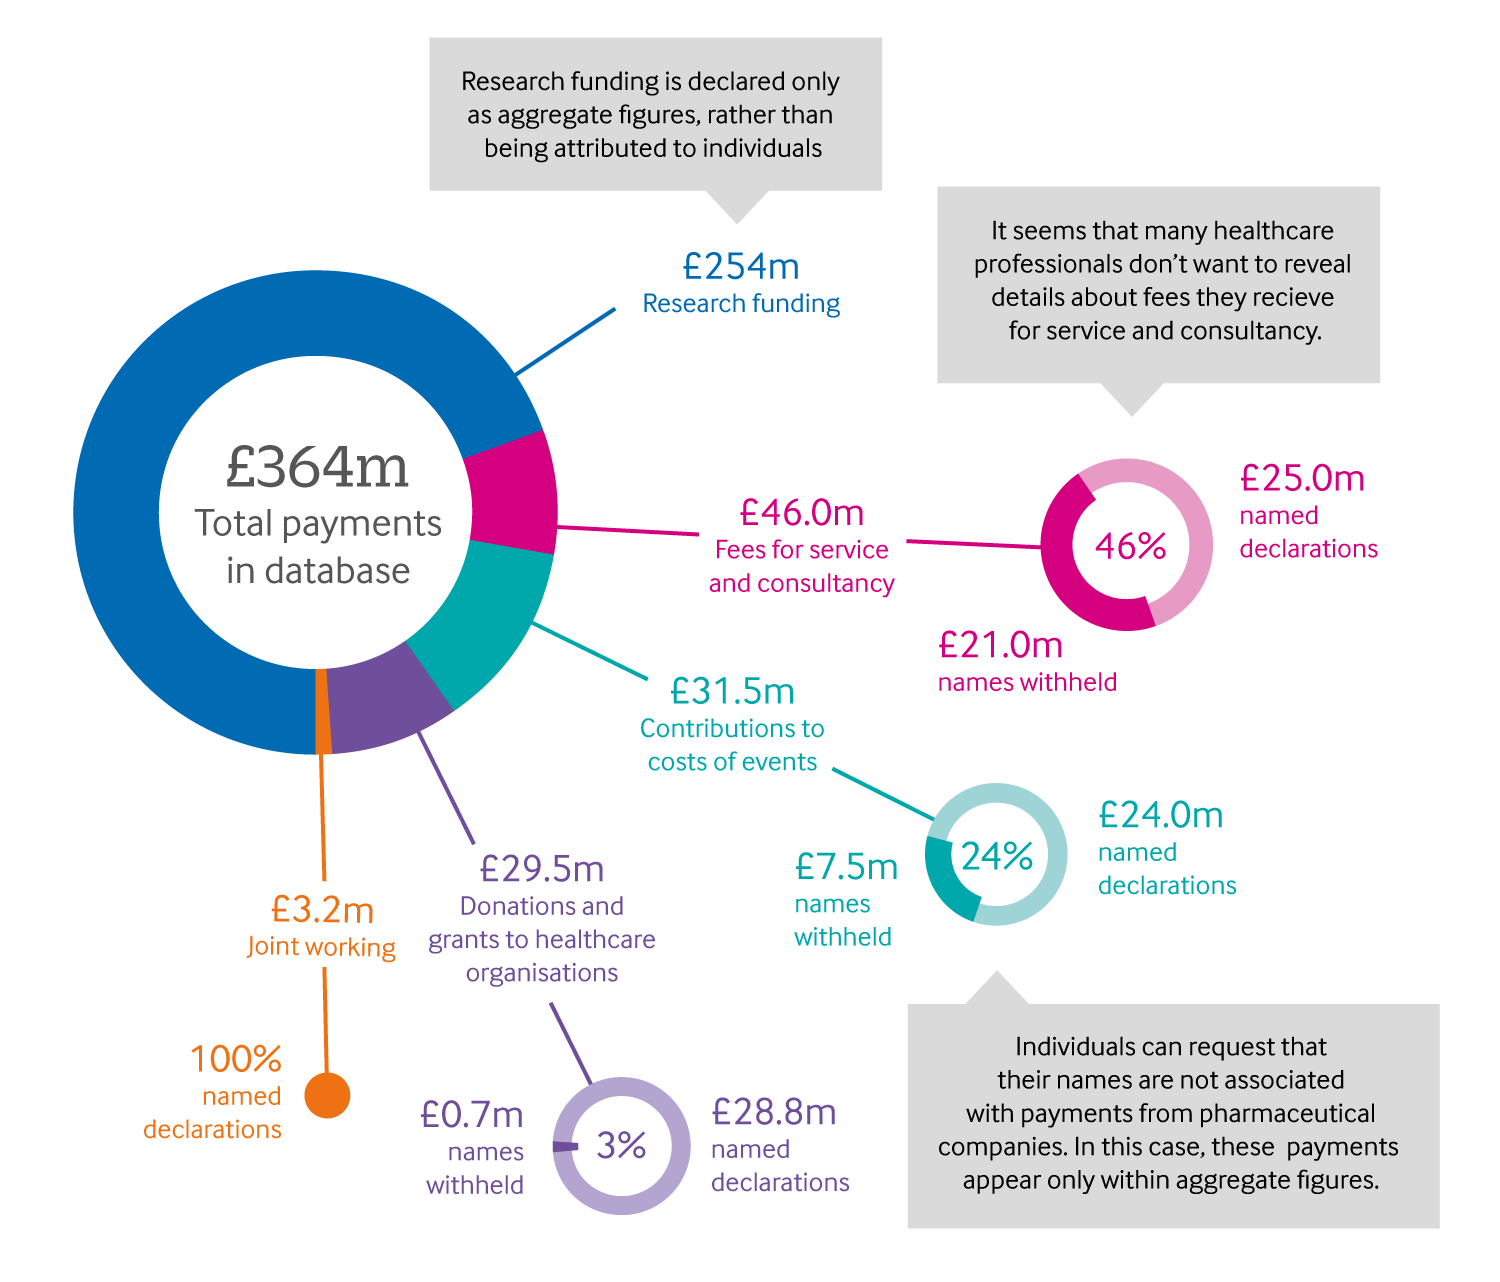 infographic showing that of the £364m total payments, £254m was research funding, £46m was fees for service and consultancy, £31.5m was contributions to costs of events, £29.5m was donations and grants to healthcare organisations, and £3.2m was for joint working.